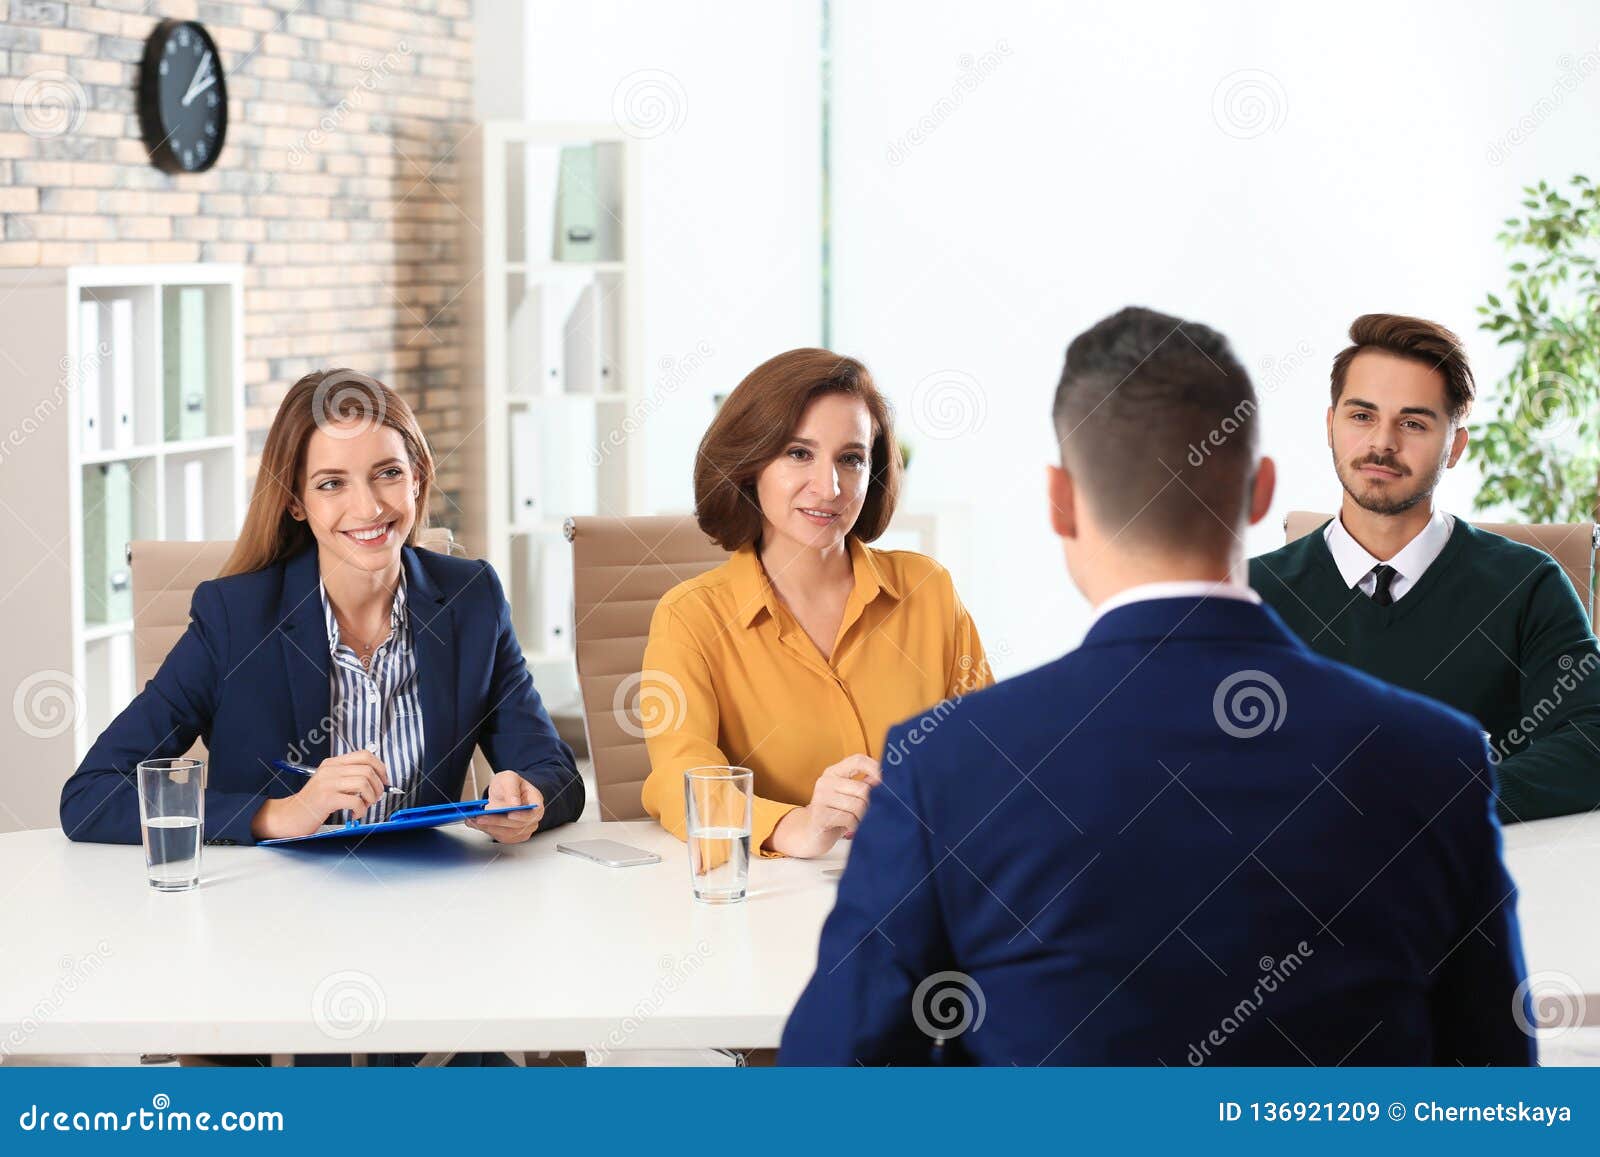 human resources commission conducting job interview with applicant